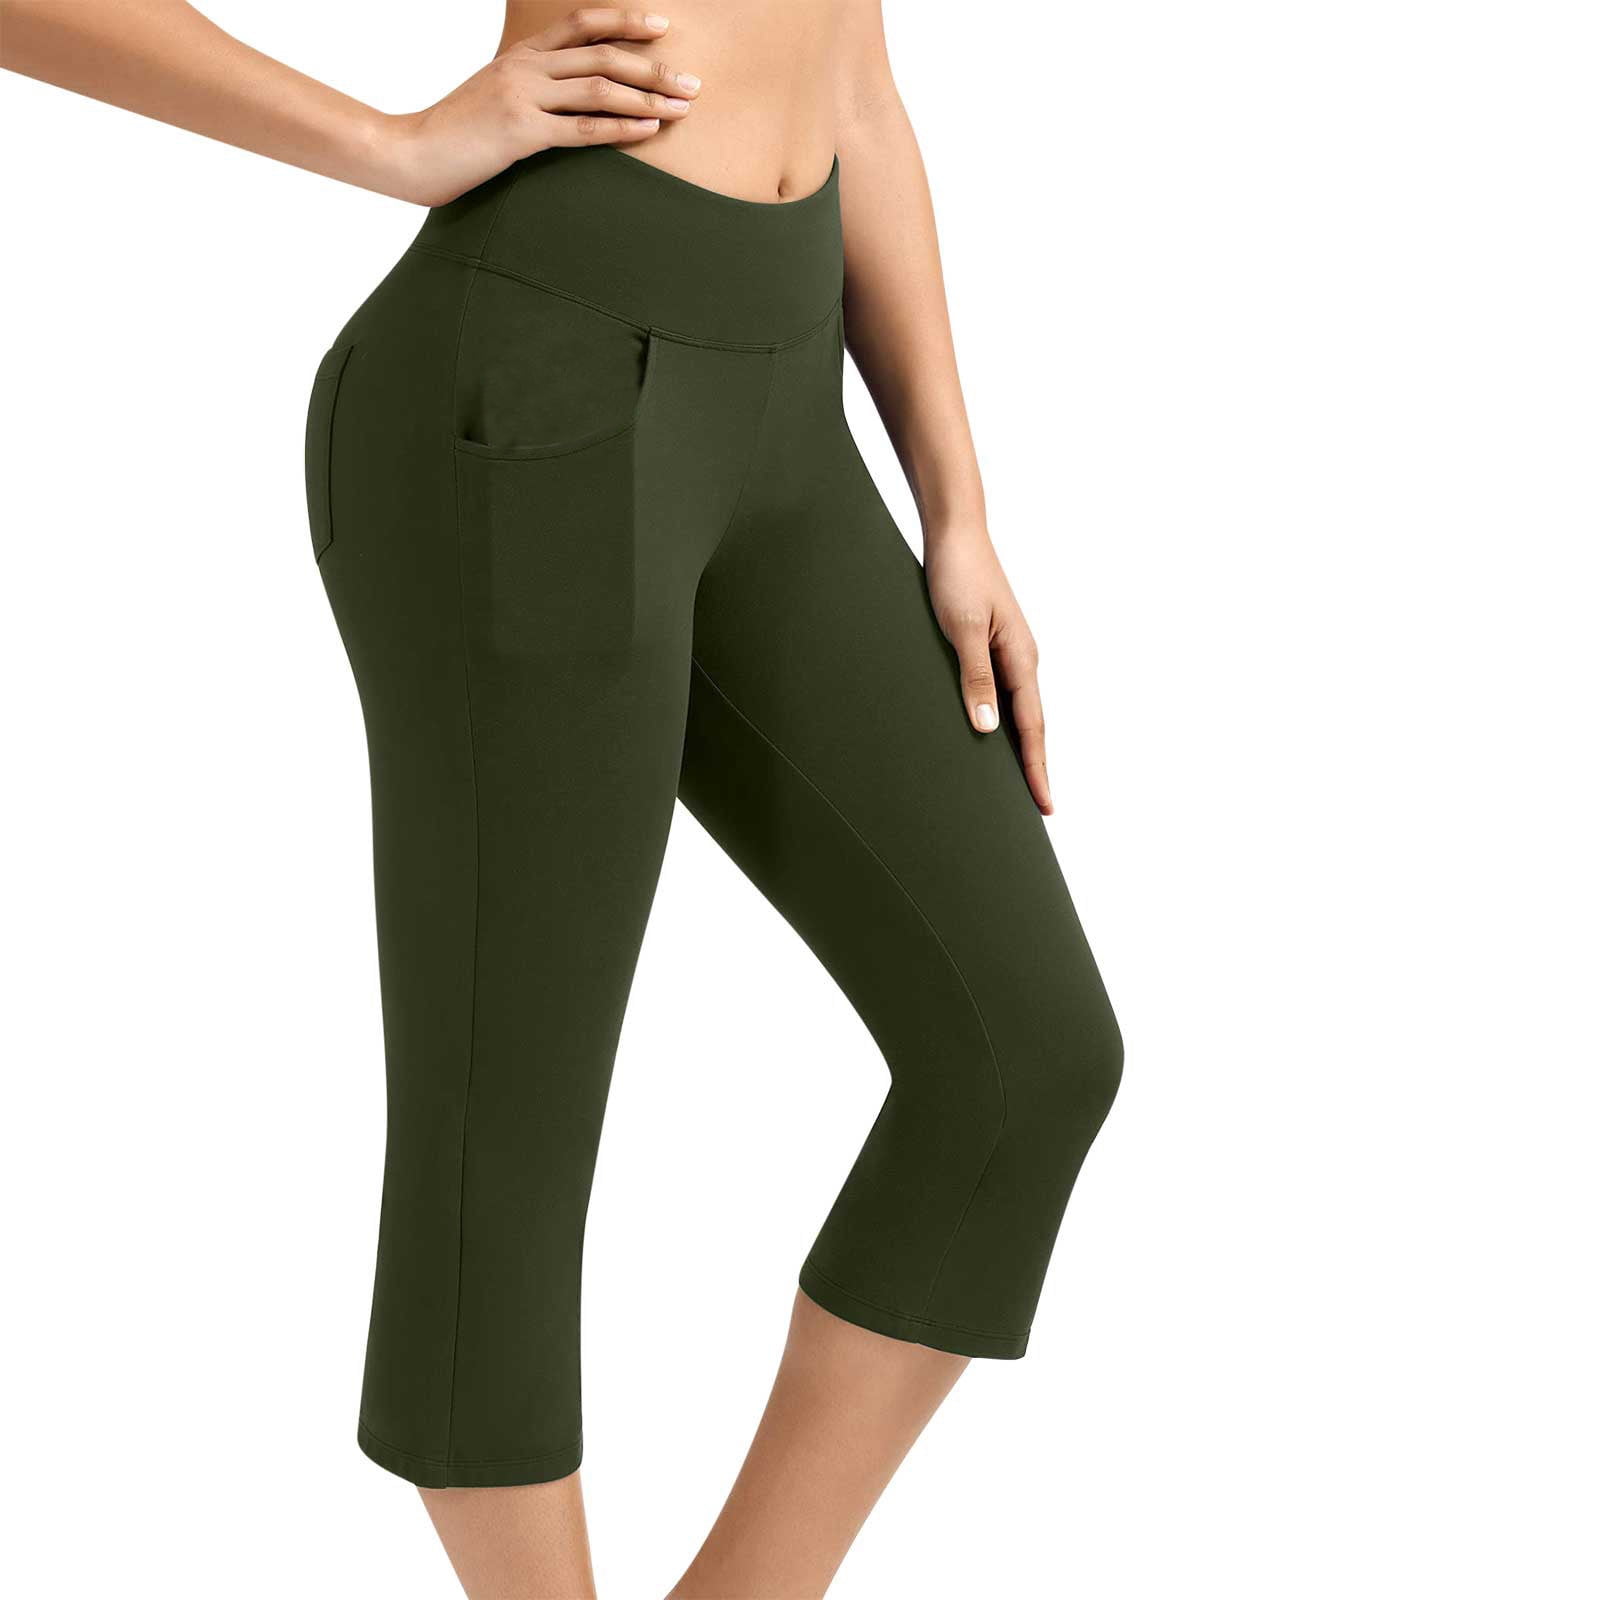 Puntoco Plus Size Clearance women dress Women's Knee Length Leggings High  Waisted Yoga Workout Exercise Capris for Summer with Pockets Army Green